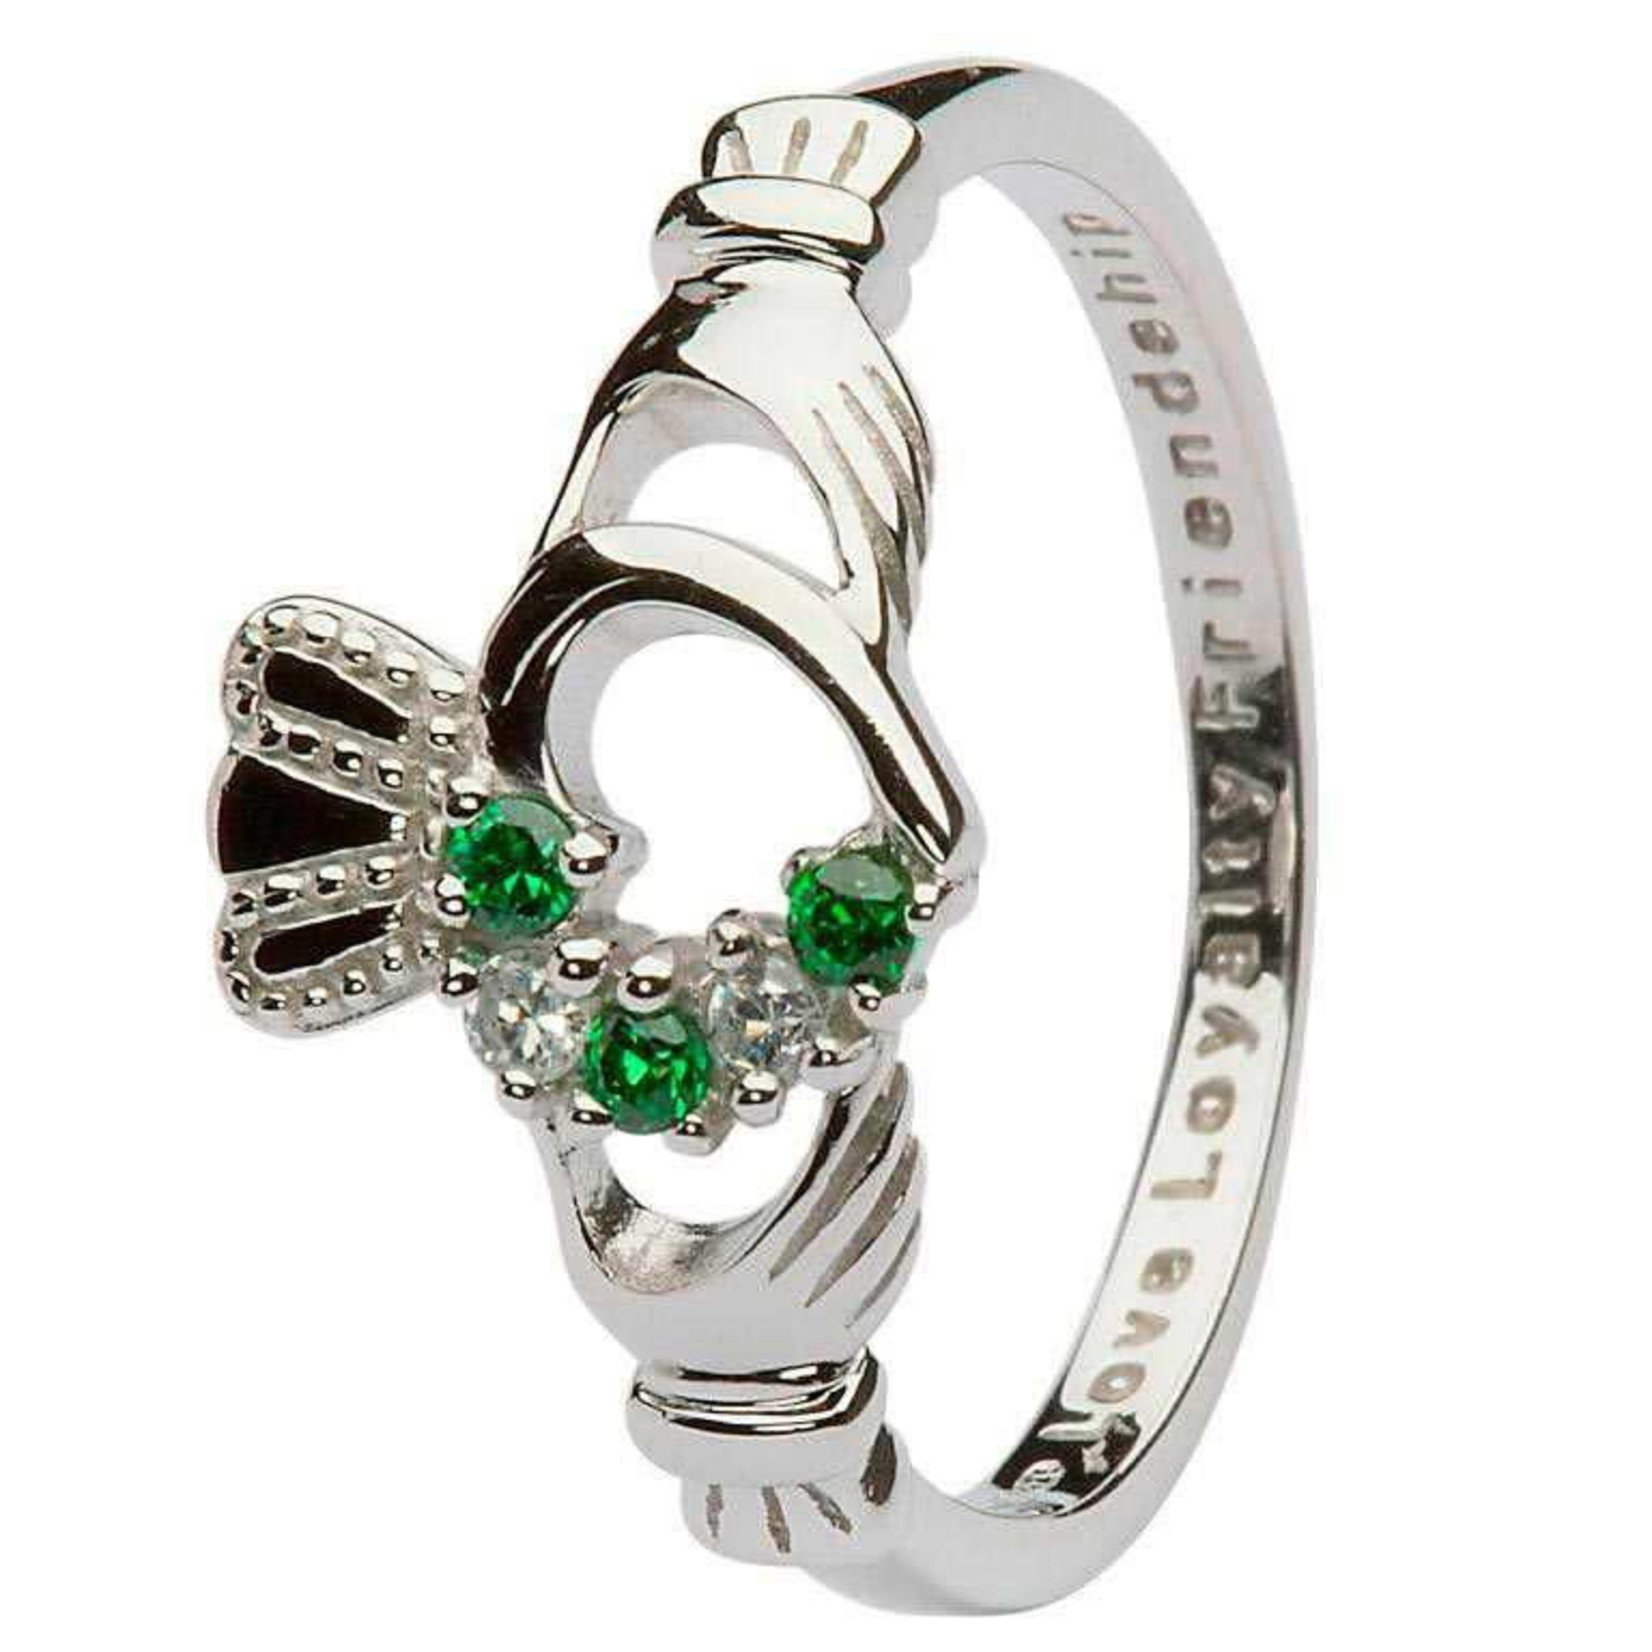 Shanore Claddagh Ring Stone Set Heart